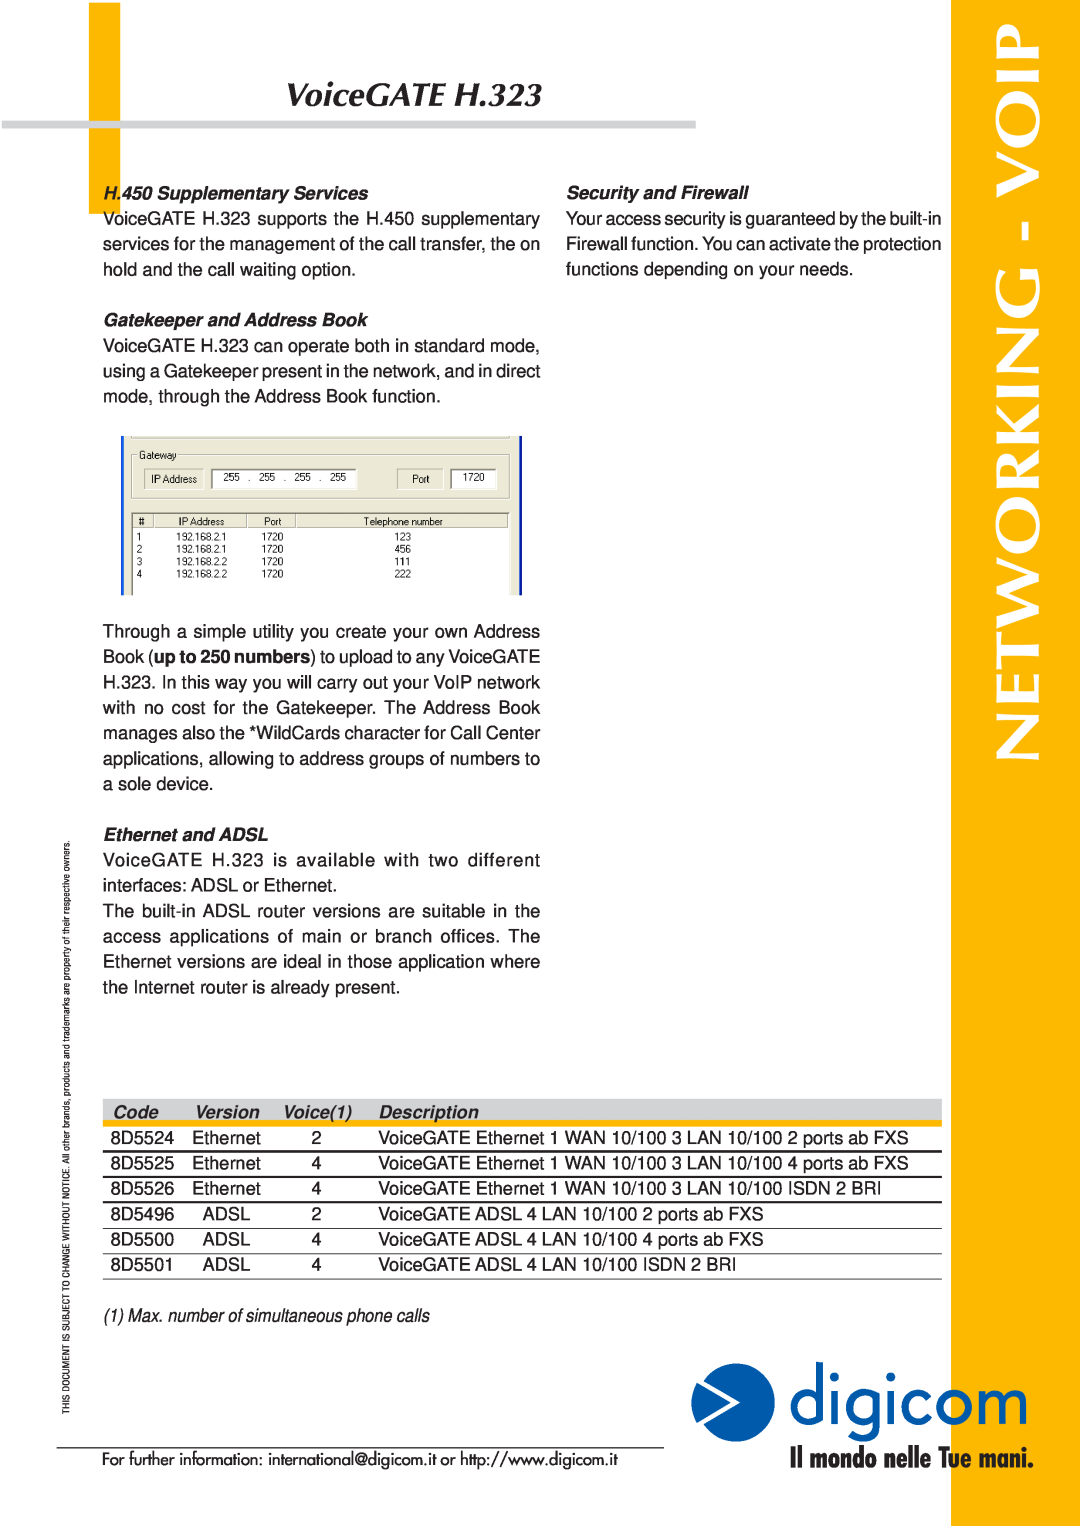 Digicom H.323 Networking - Voip, H.450 Supplementary Services, Security and Firewall, Gatekeeper and Address Book, Code 